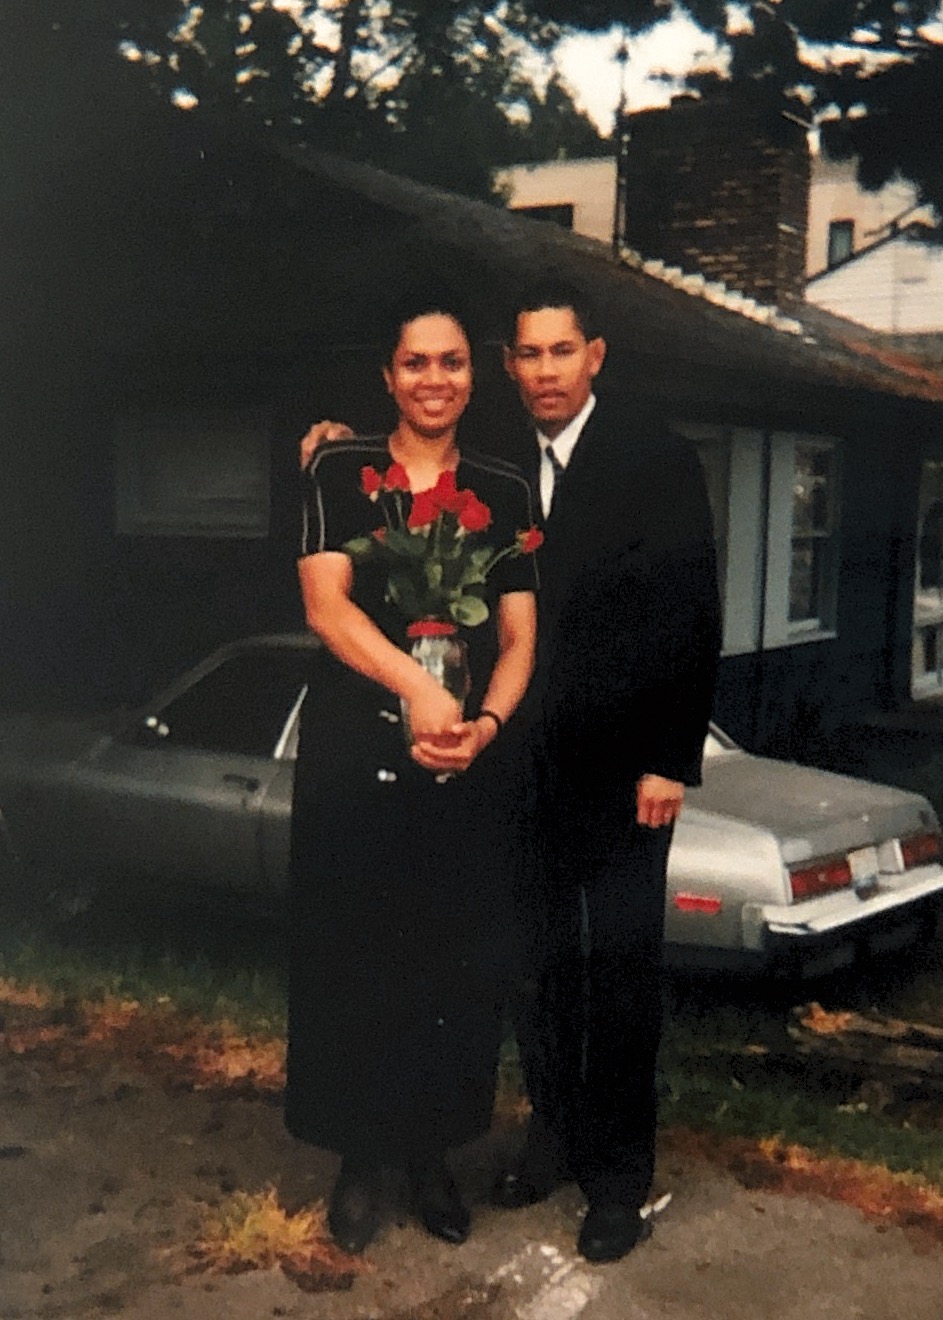 Valentines Day 18 years ago.Sweet Memories and blessed to share my life with this beautiful woman.